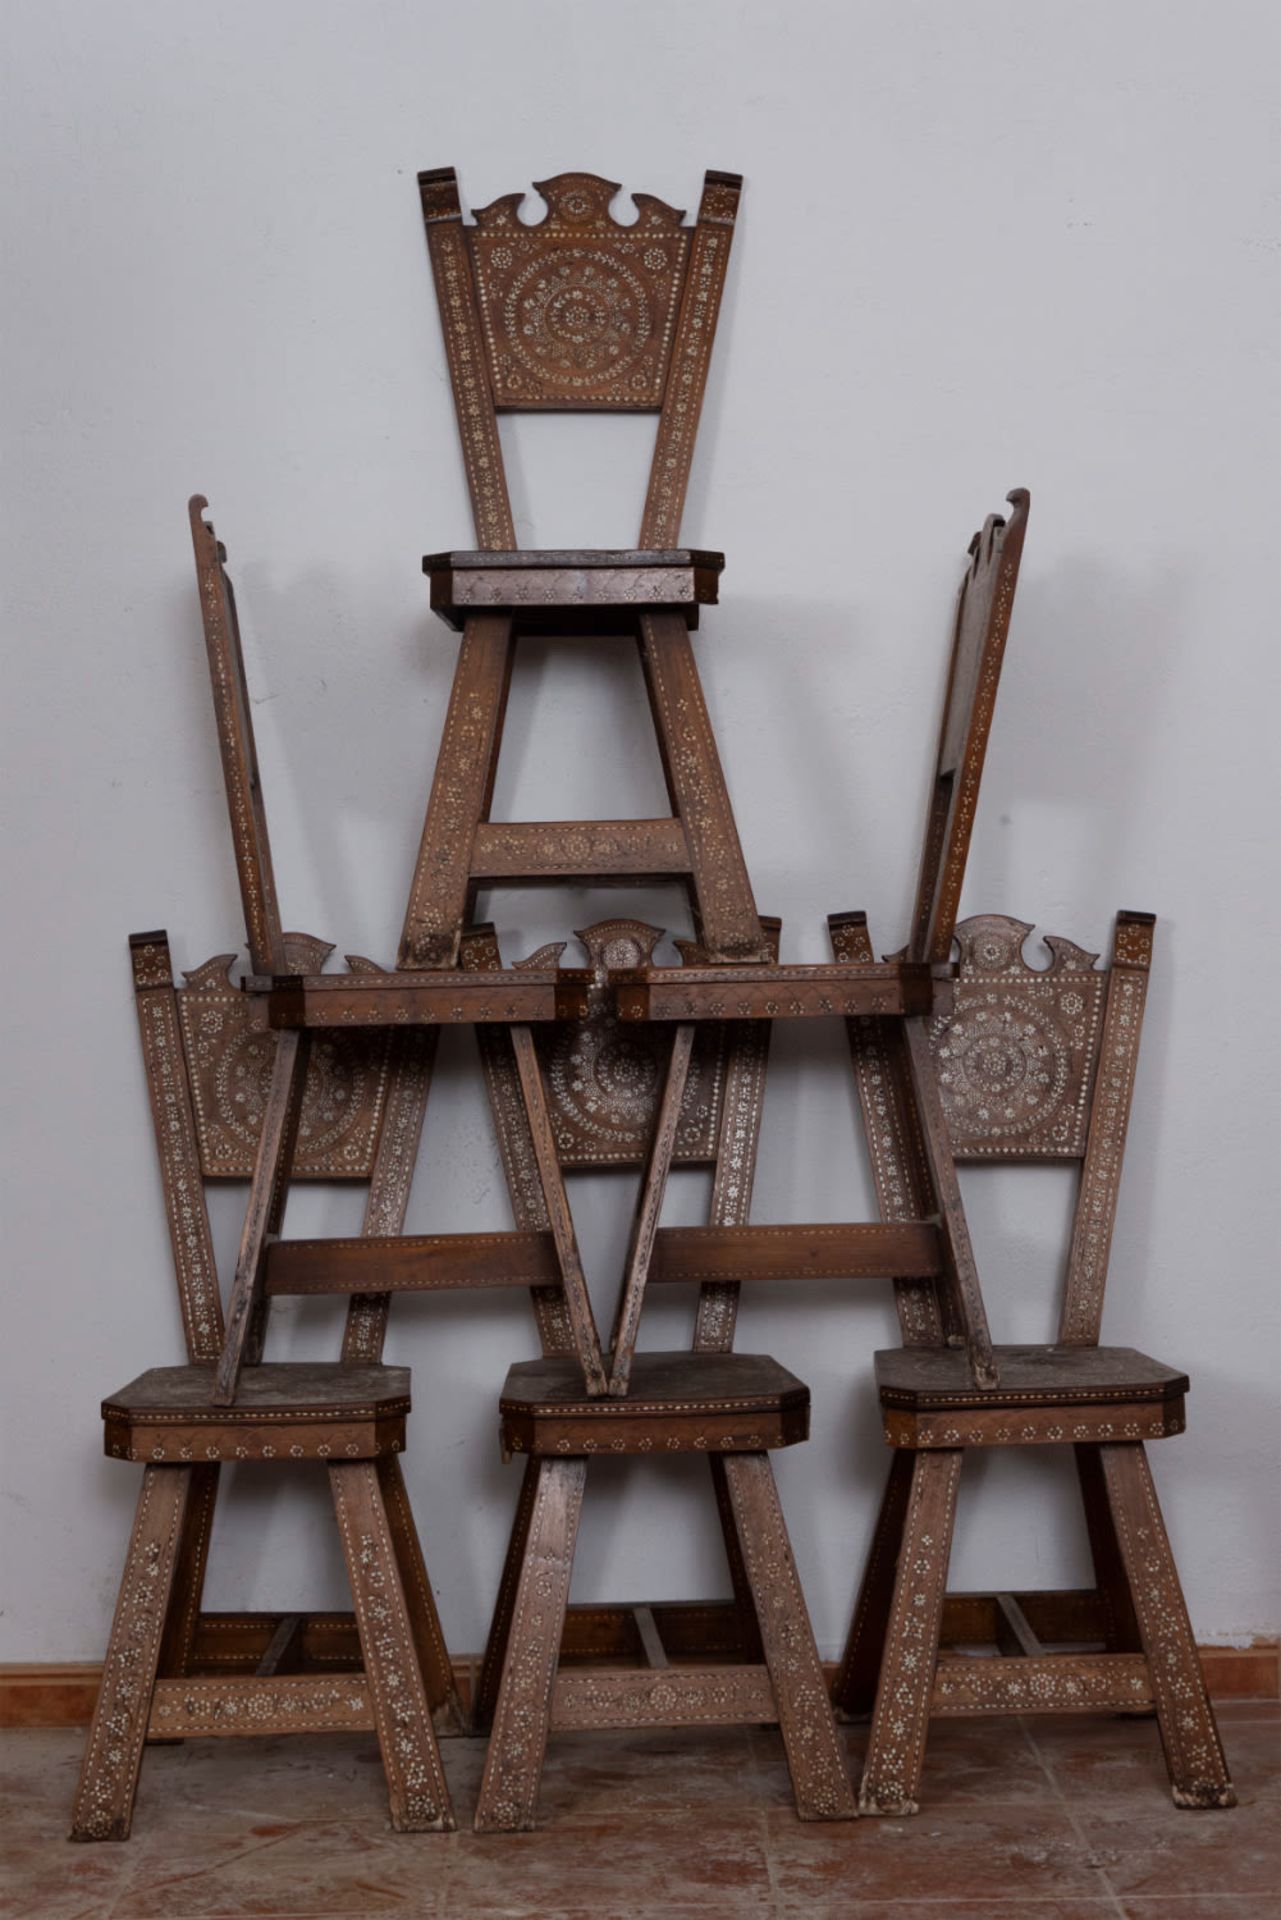 Lot of six chairs with bone inlays with geometric and floral decoration, 19th century